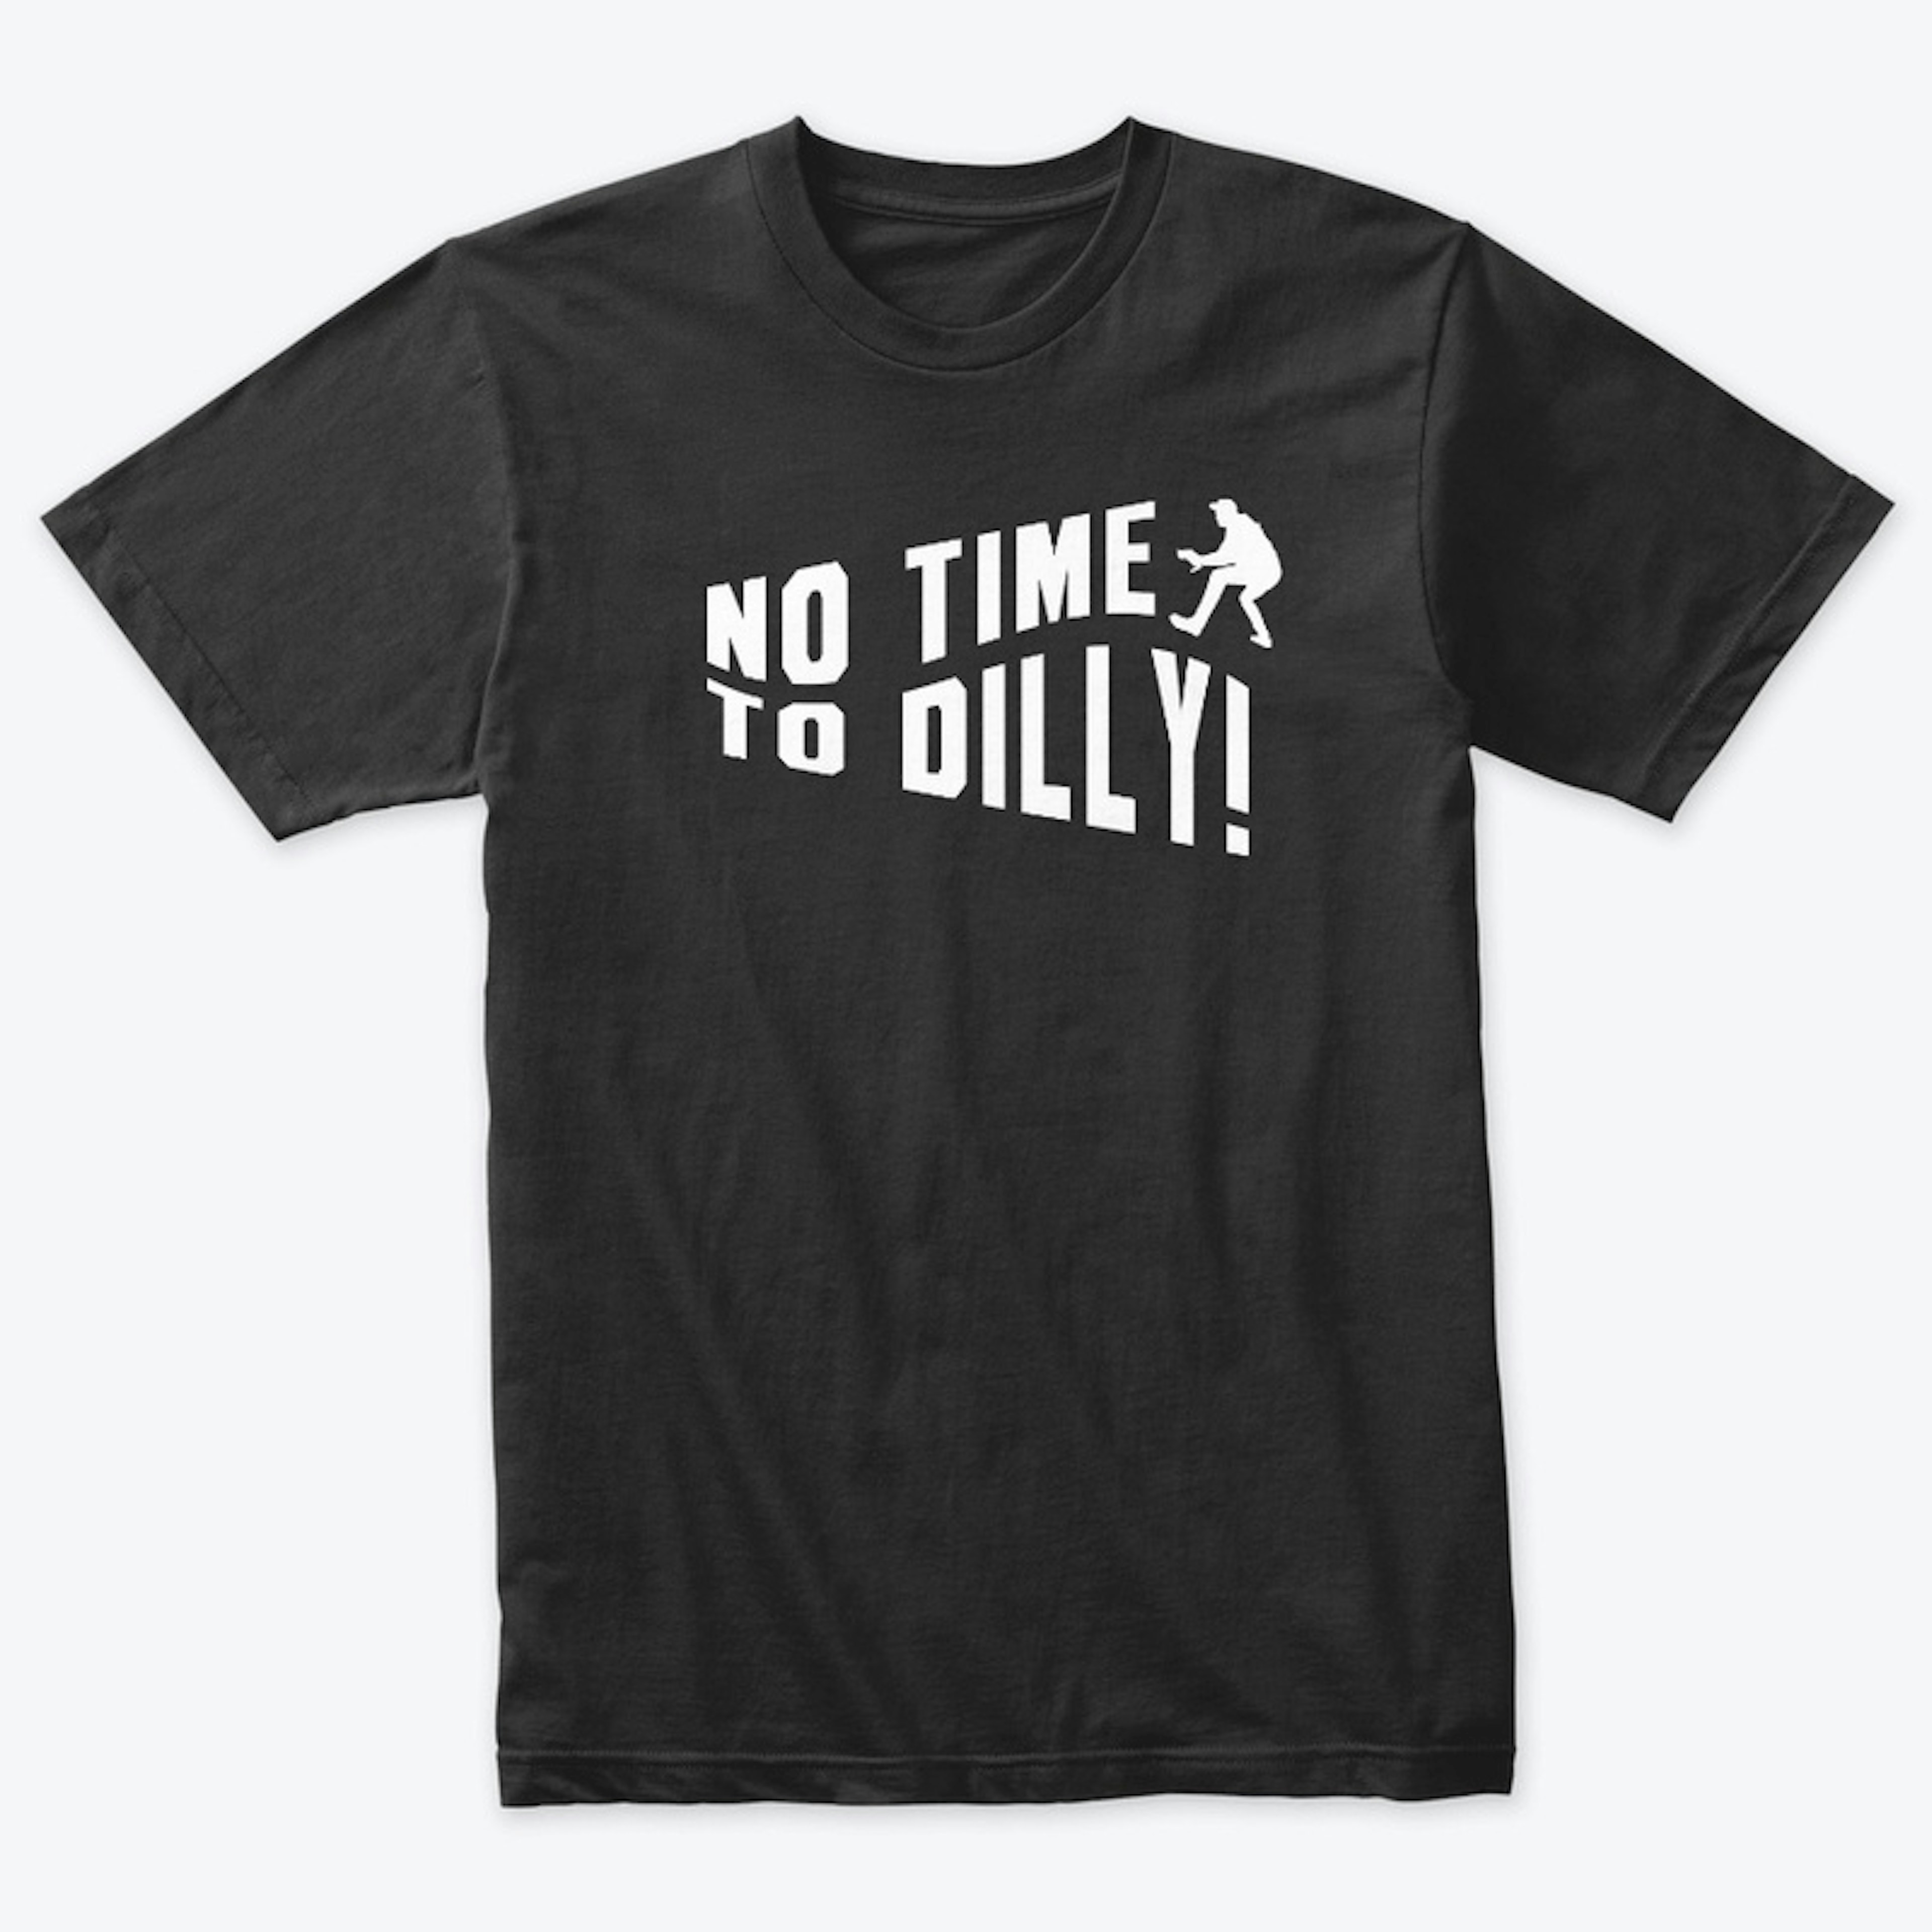 No Time to Dilly!